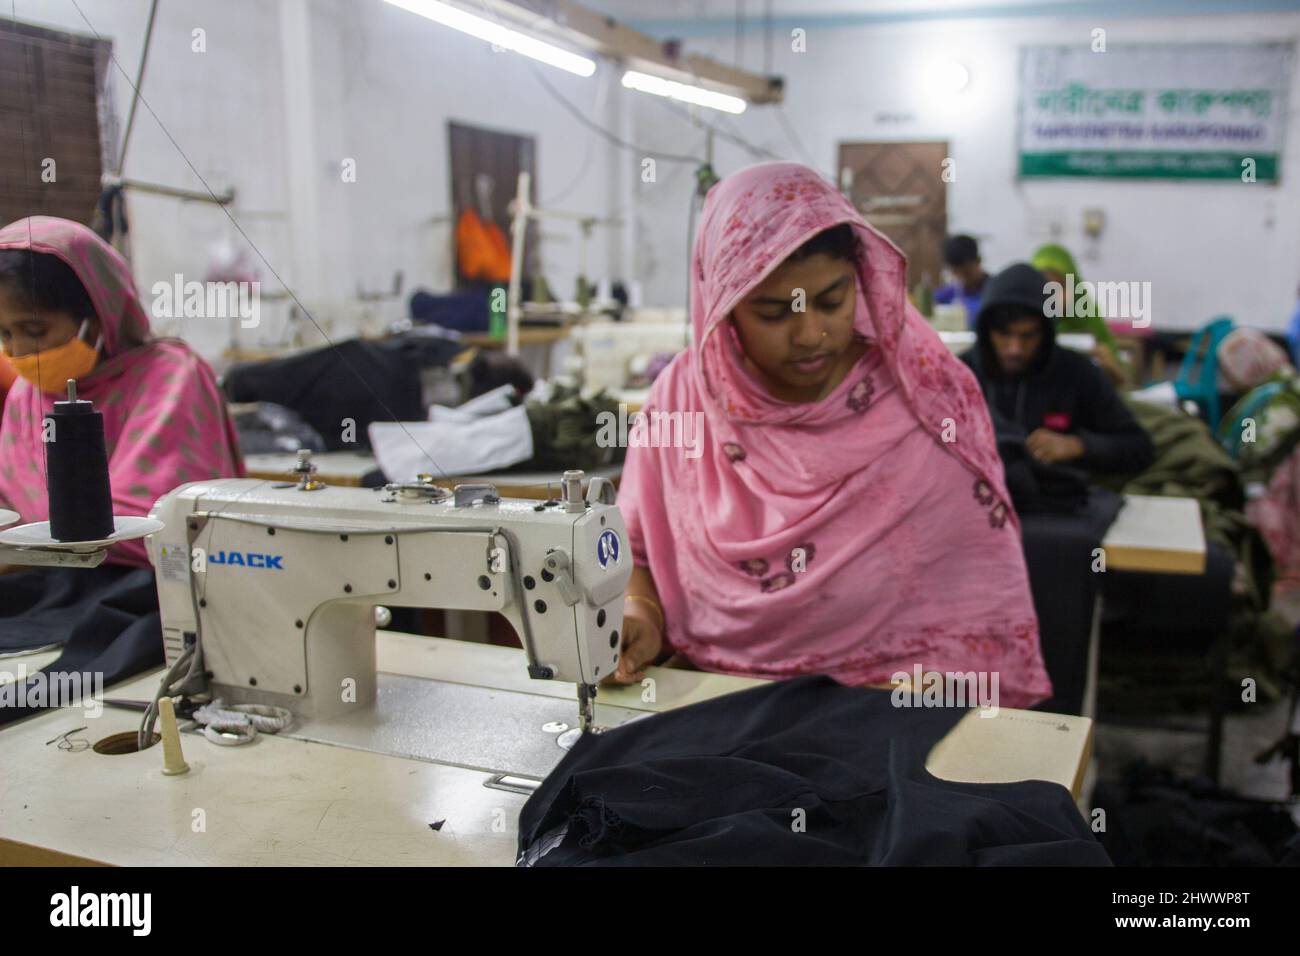 Garment workers at work on the production line inside a garment factory in Bangladesh. Stock Photo